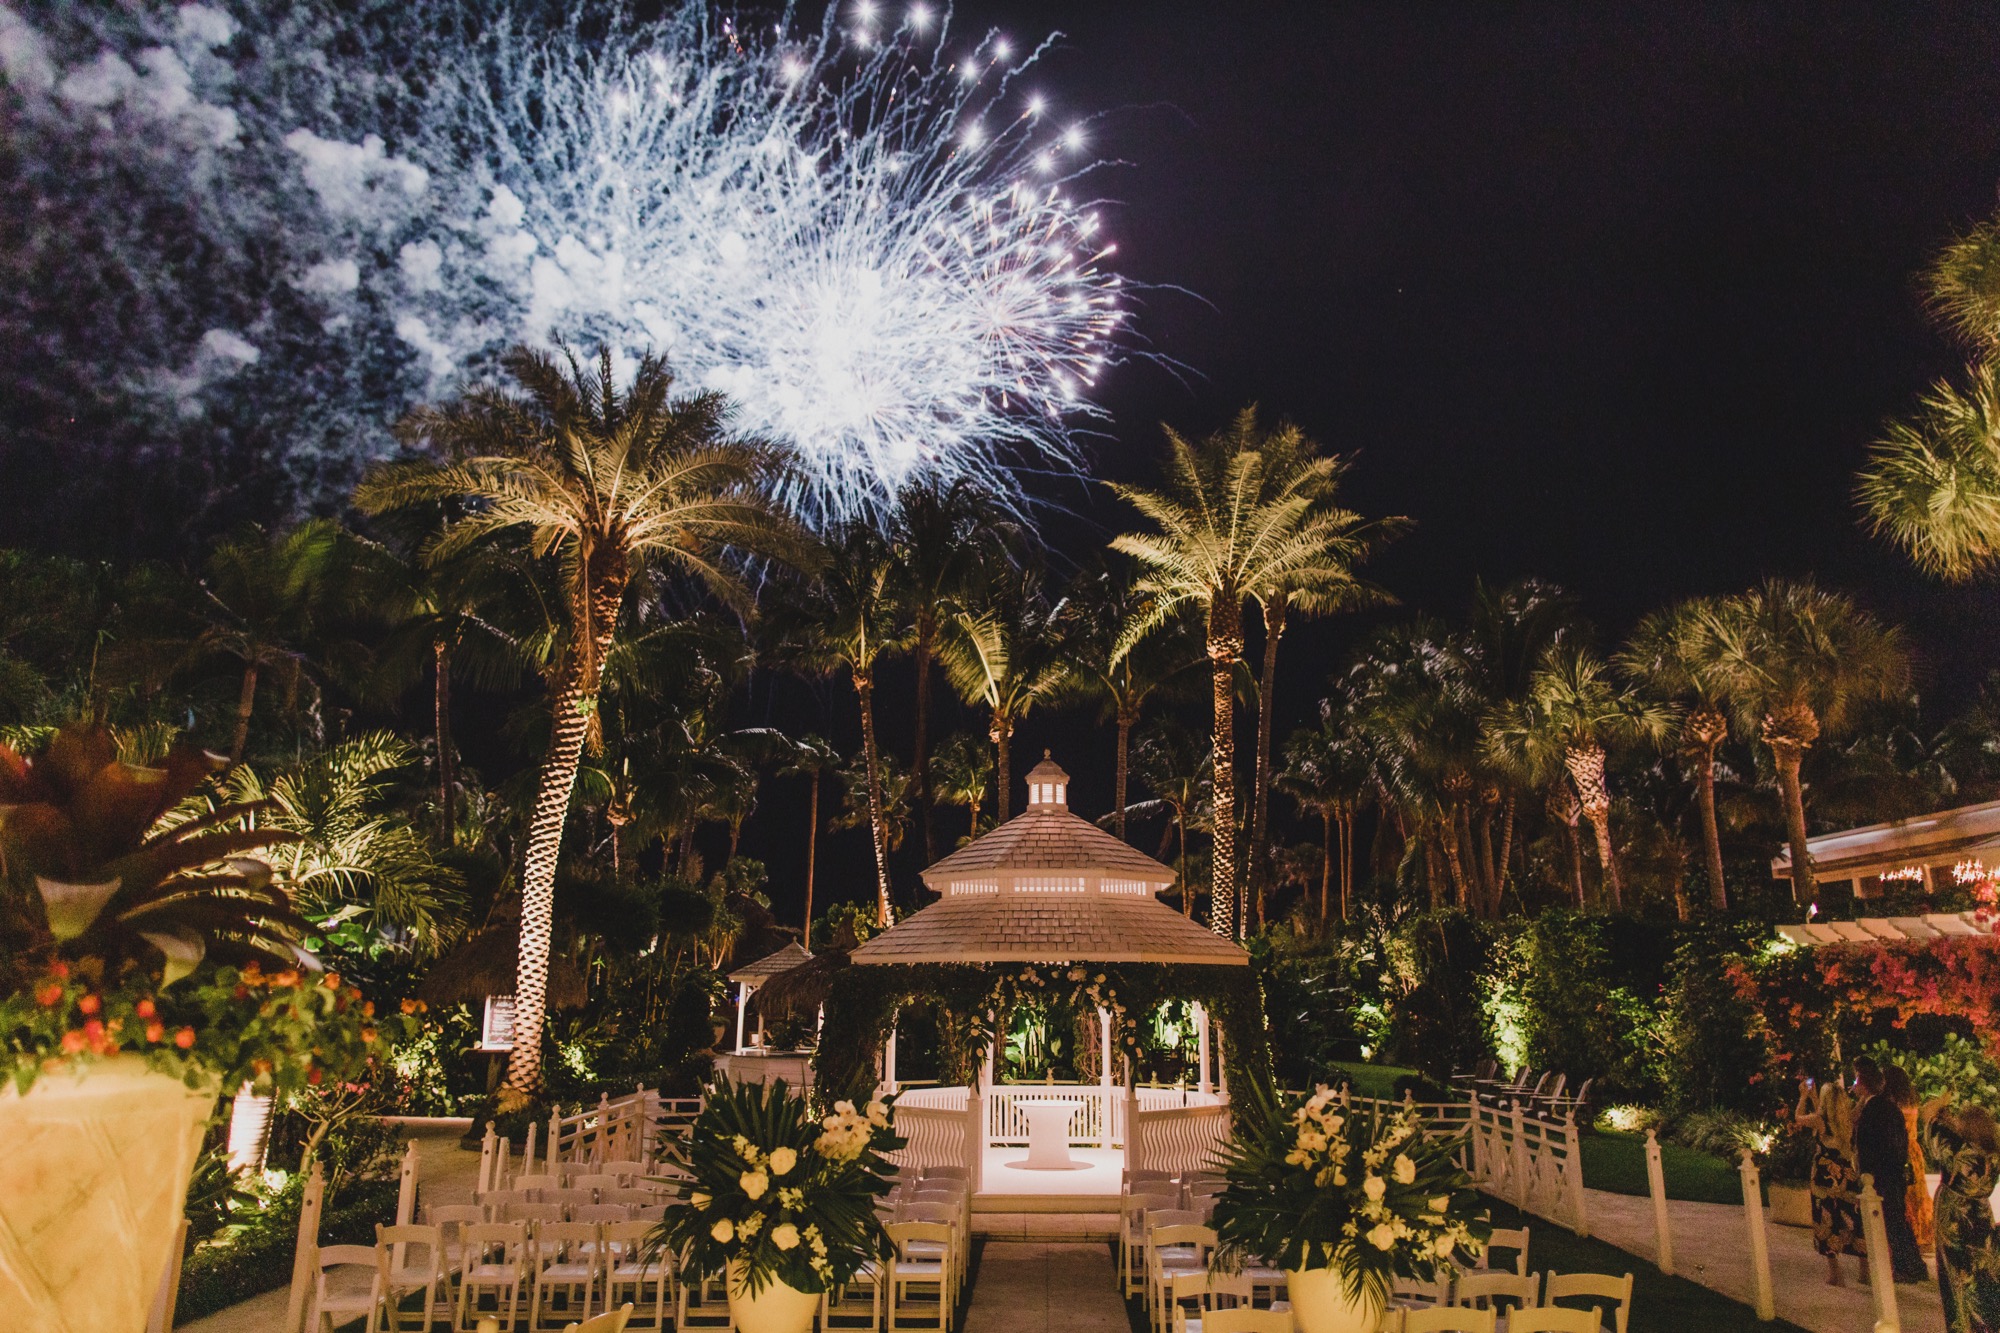 Night time fireworks show at the Palms Hotel & Spa